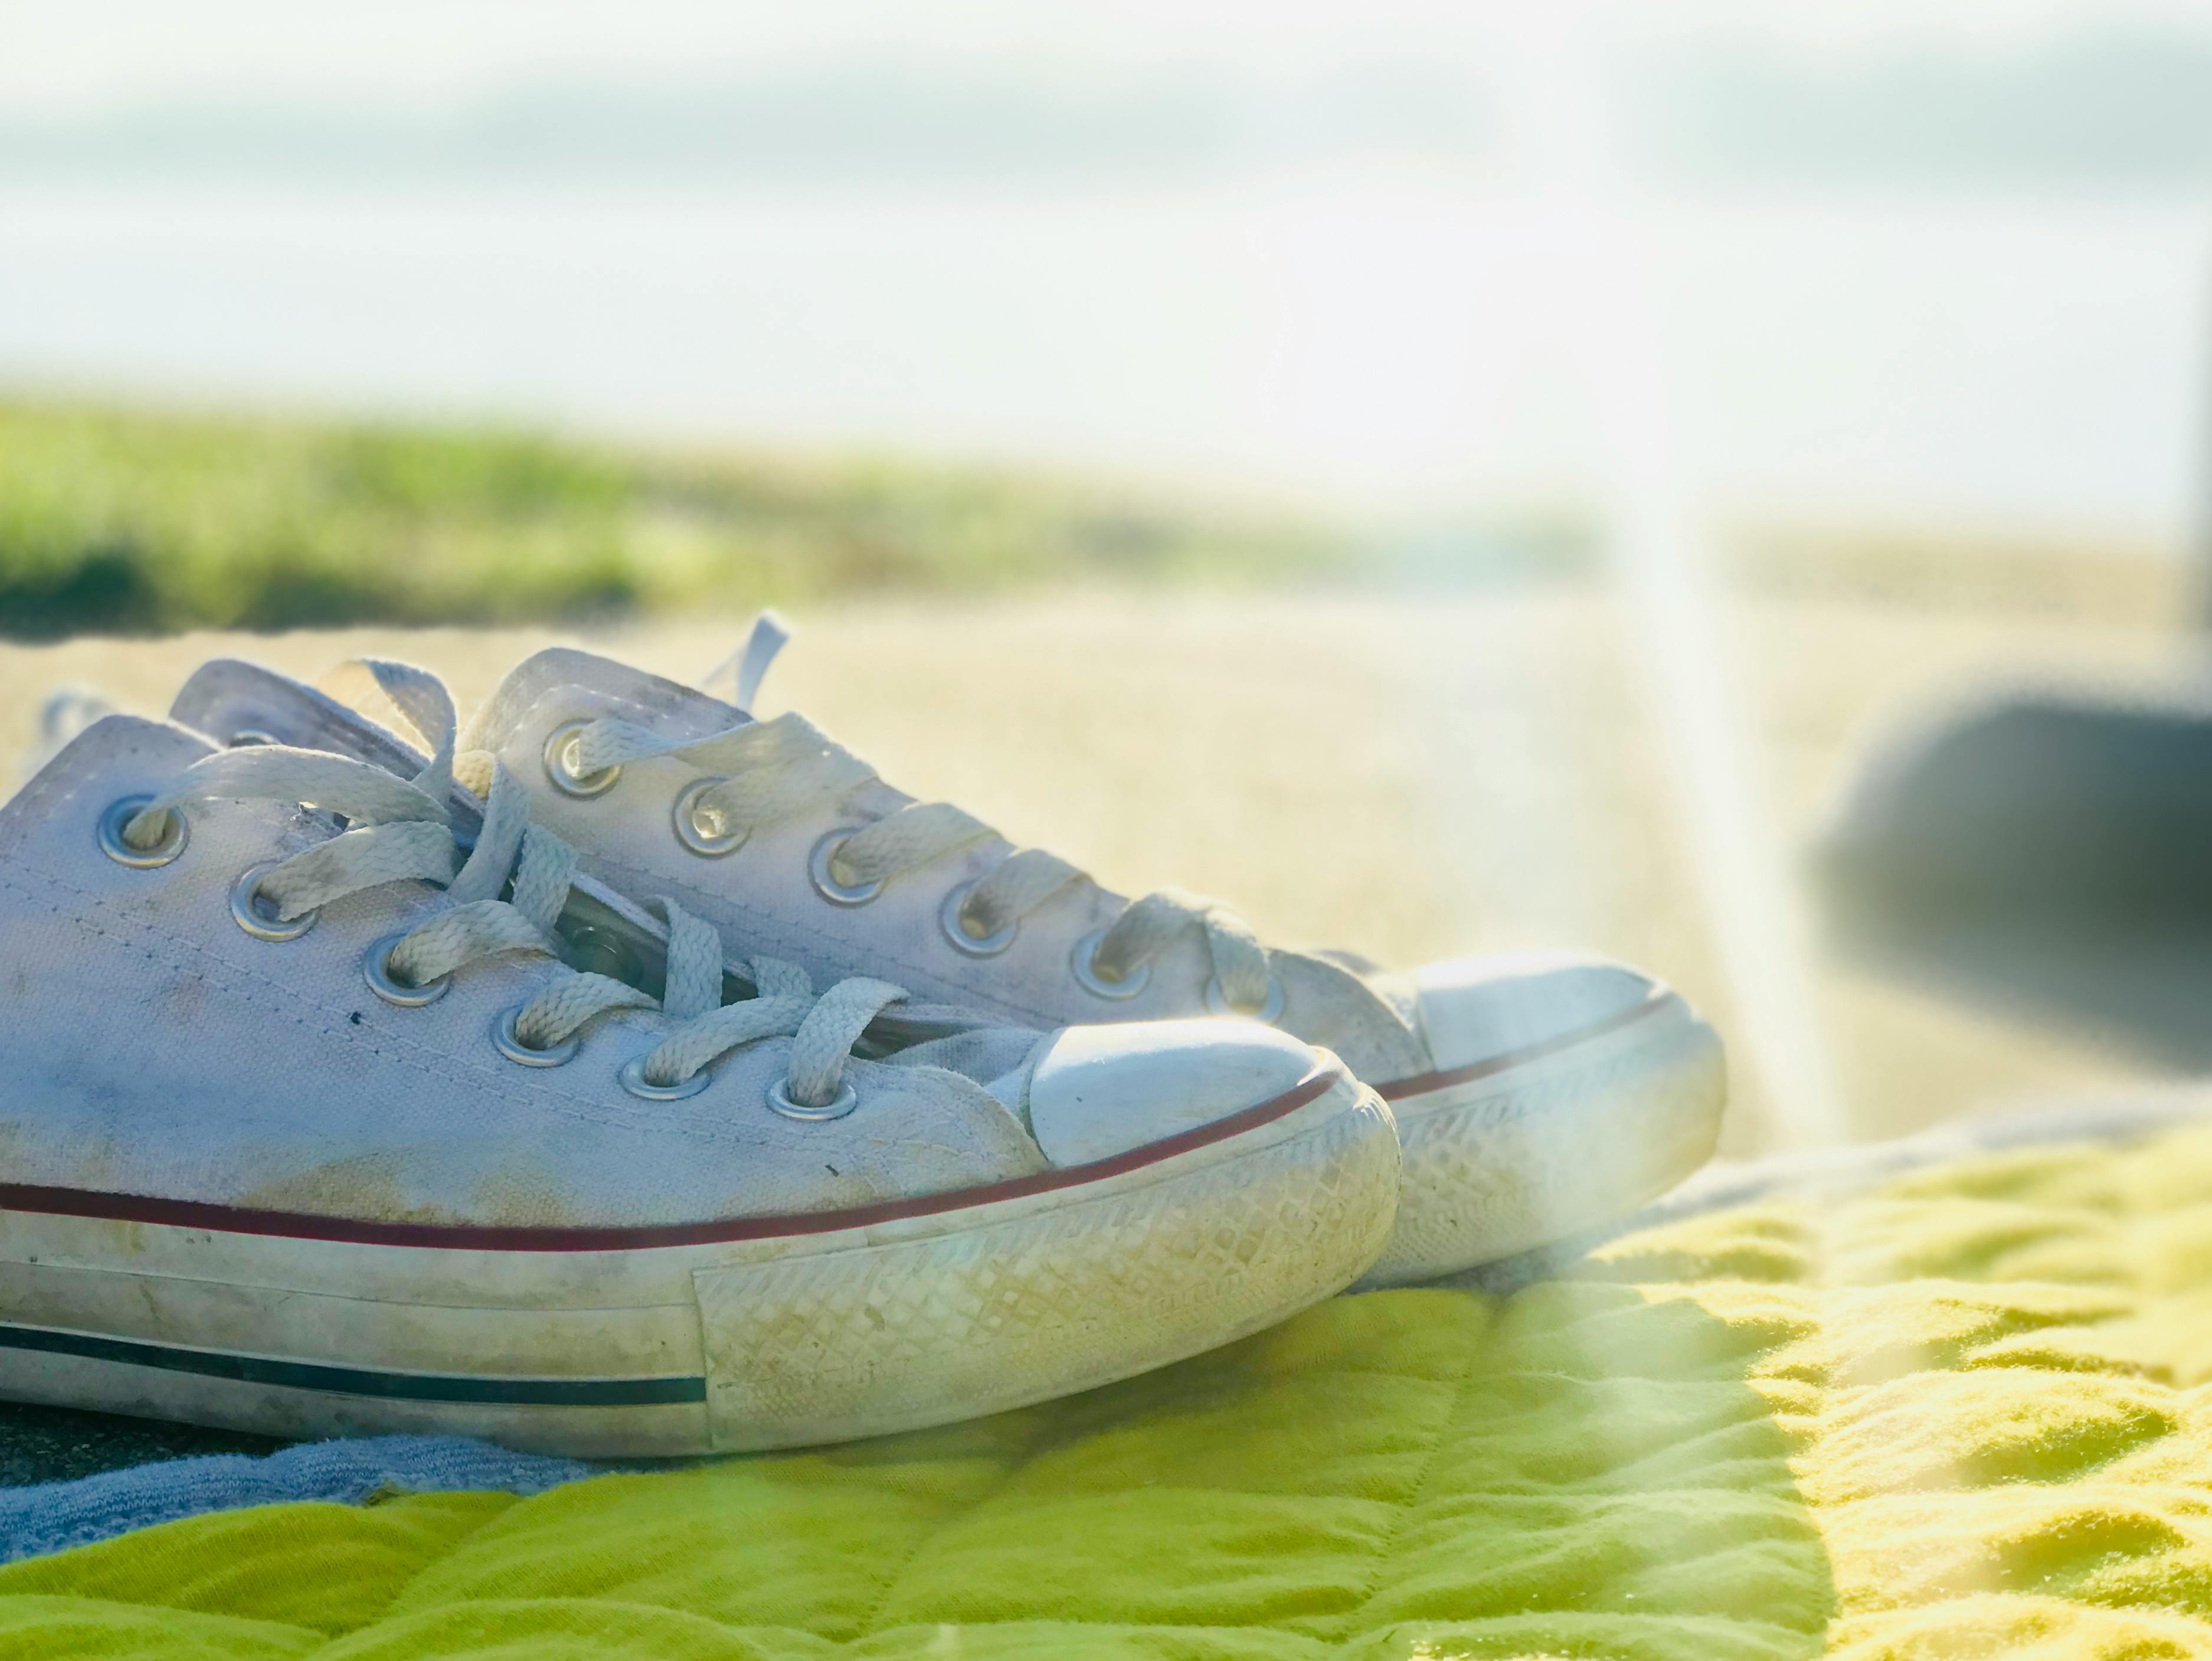 Free stock photo of athletic shoes, blanket, chucks